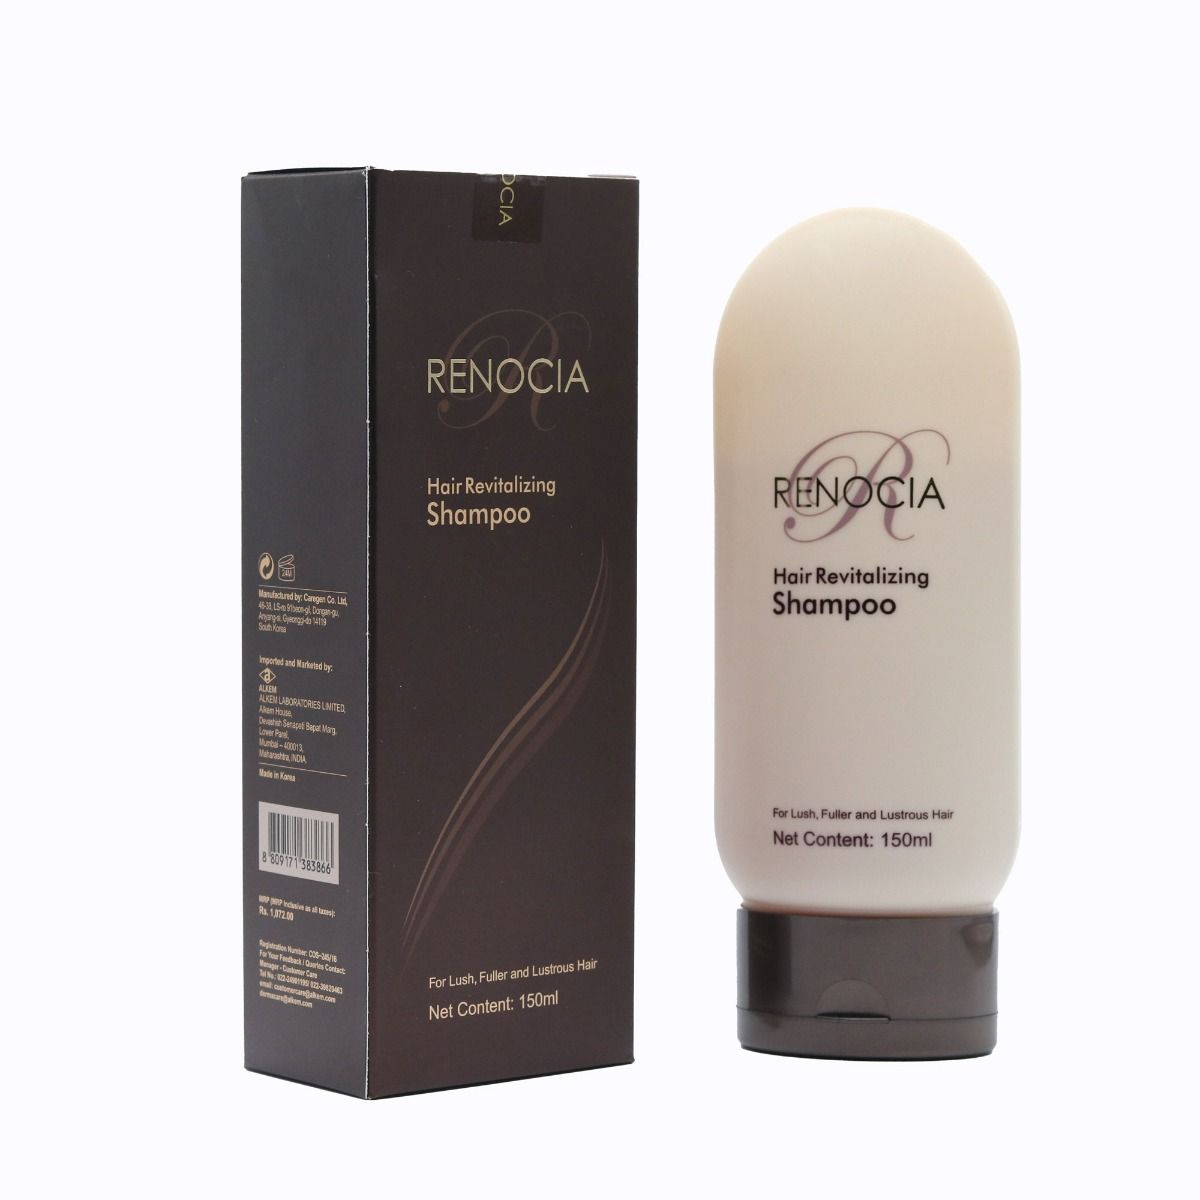 Renocia Hair Revitalizing Shampoo, 150 ml Price, Uses, Side Effects,  Composition - Apollo Pharmacy